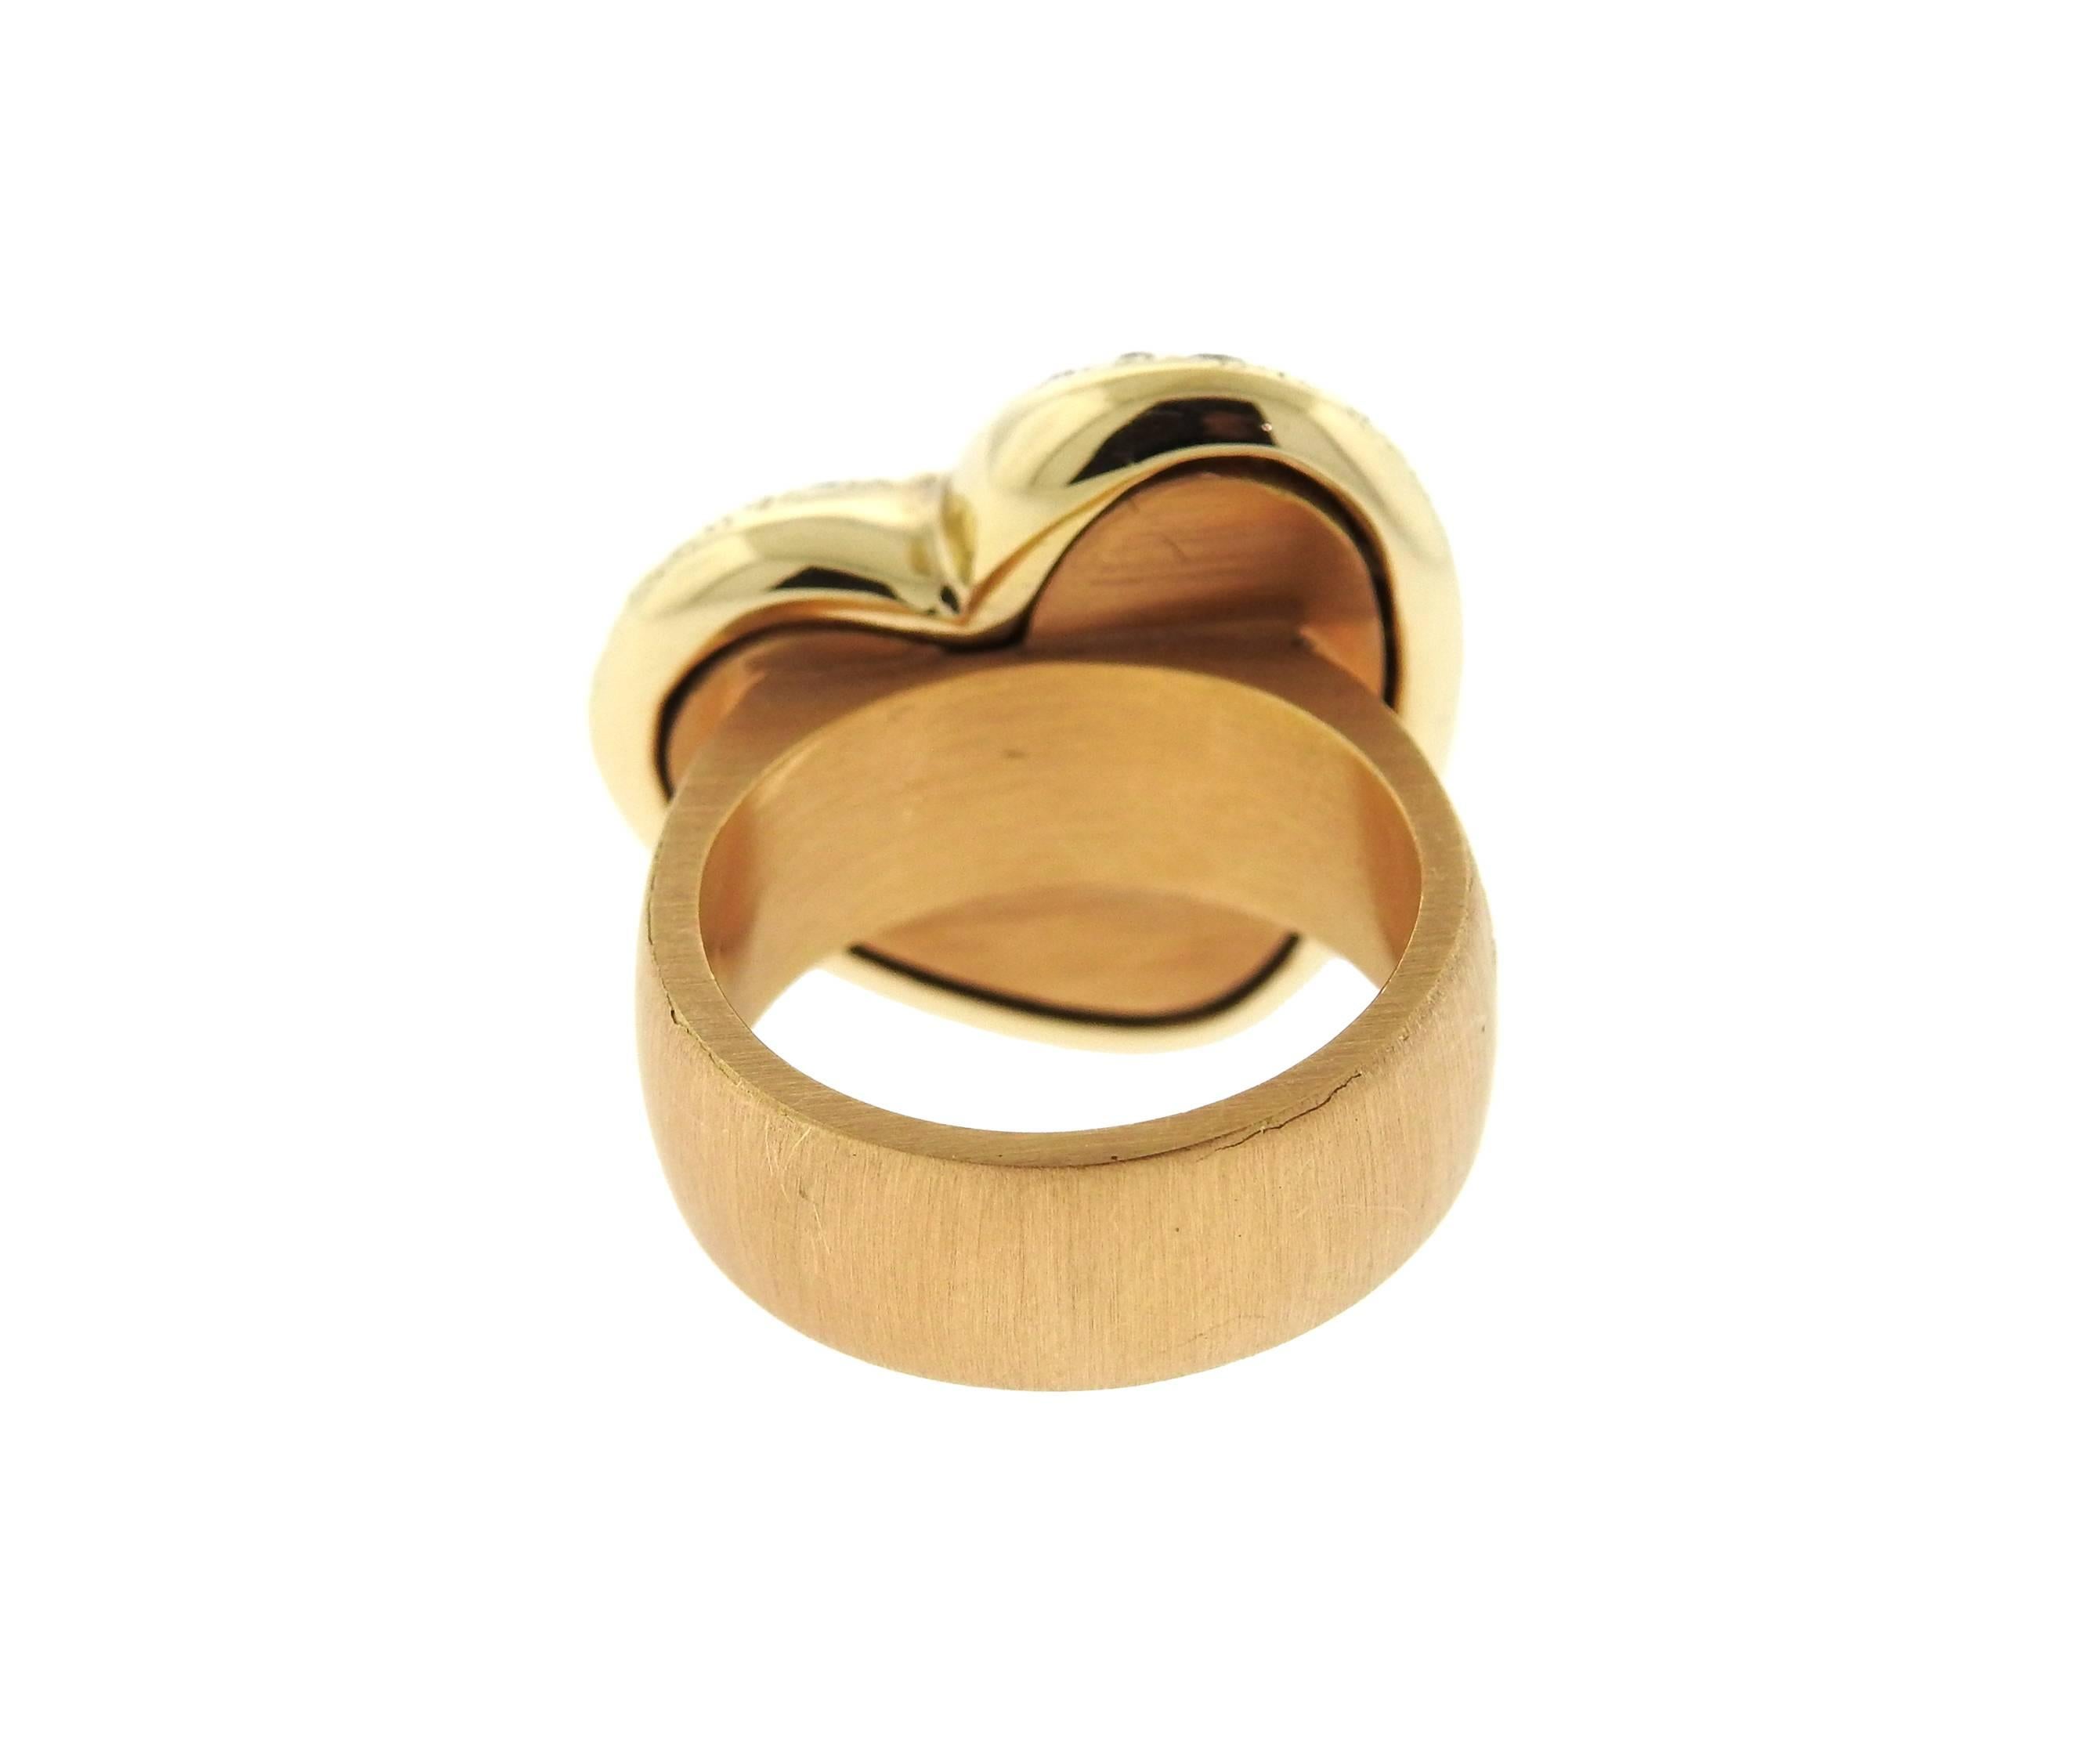 An 18k gold ring crafted by Pomellato for the Sabbia collection. Featuring 2.44ctw in fancy diamonds. Ring is a size 6 or 52. Top of ring is 21.4mm x 20.6mm. Marked Pomellato,750, Italian Assay Marks and weighs 24.7 grams. Retails for $10150